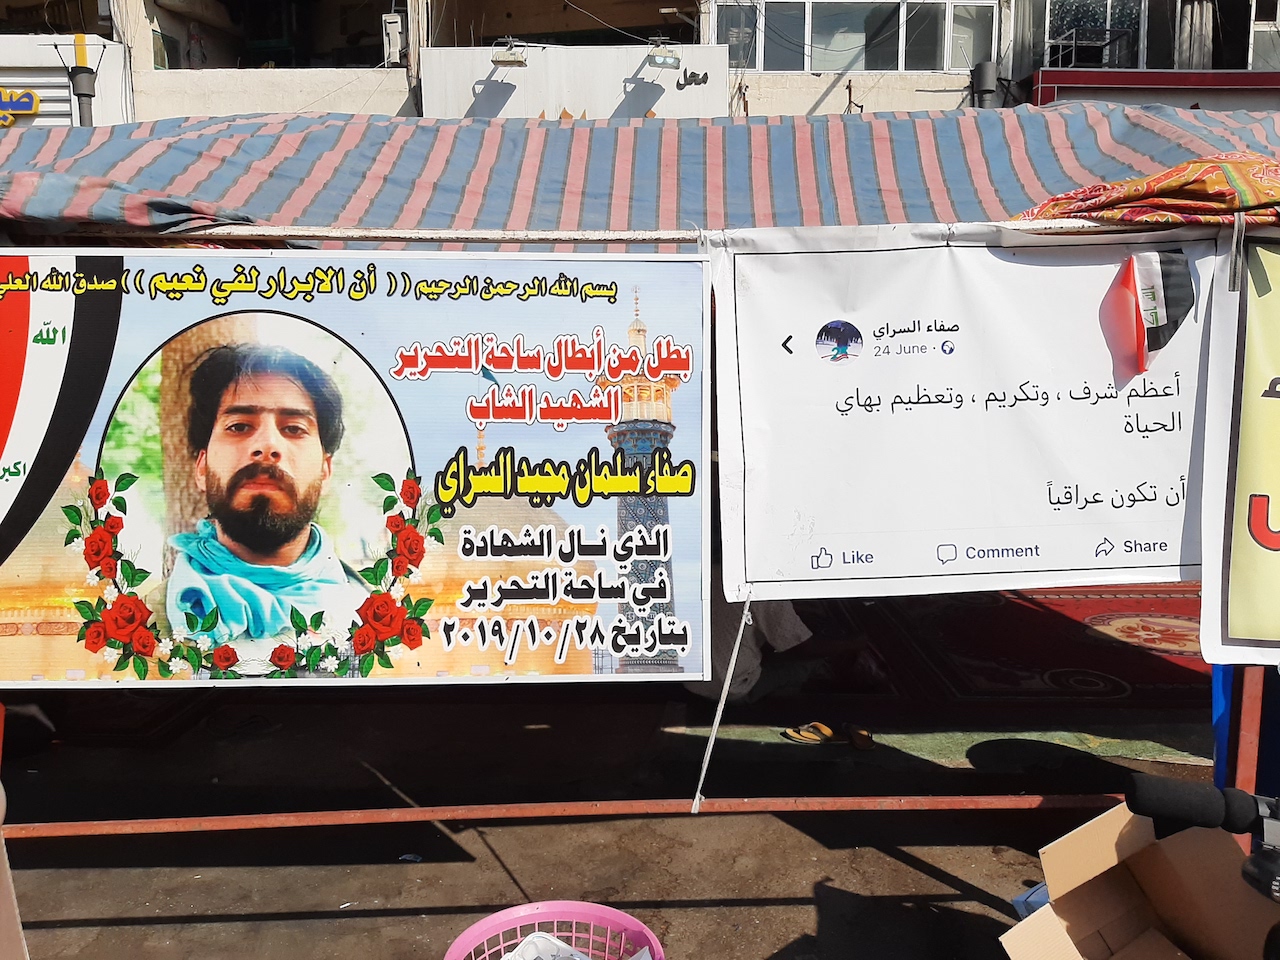 A banner showing a Facebook picture of Safaa al-Sarray. Banner on left: “The greatest honour and magnificence in this life is to be Iraqi" (Alex MacDonald)